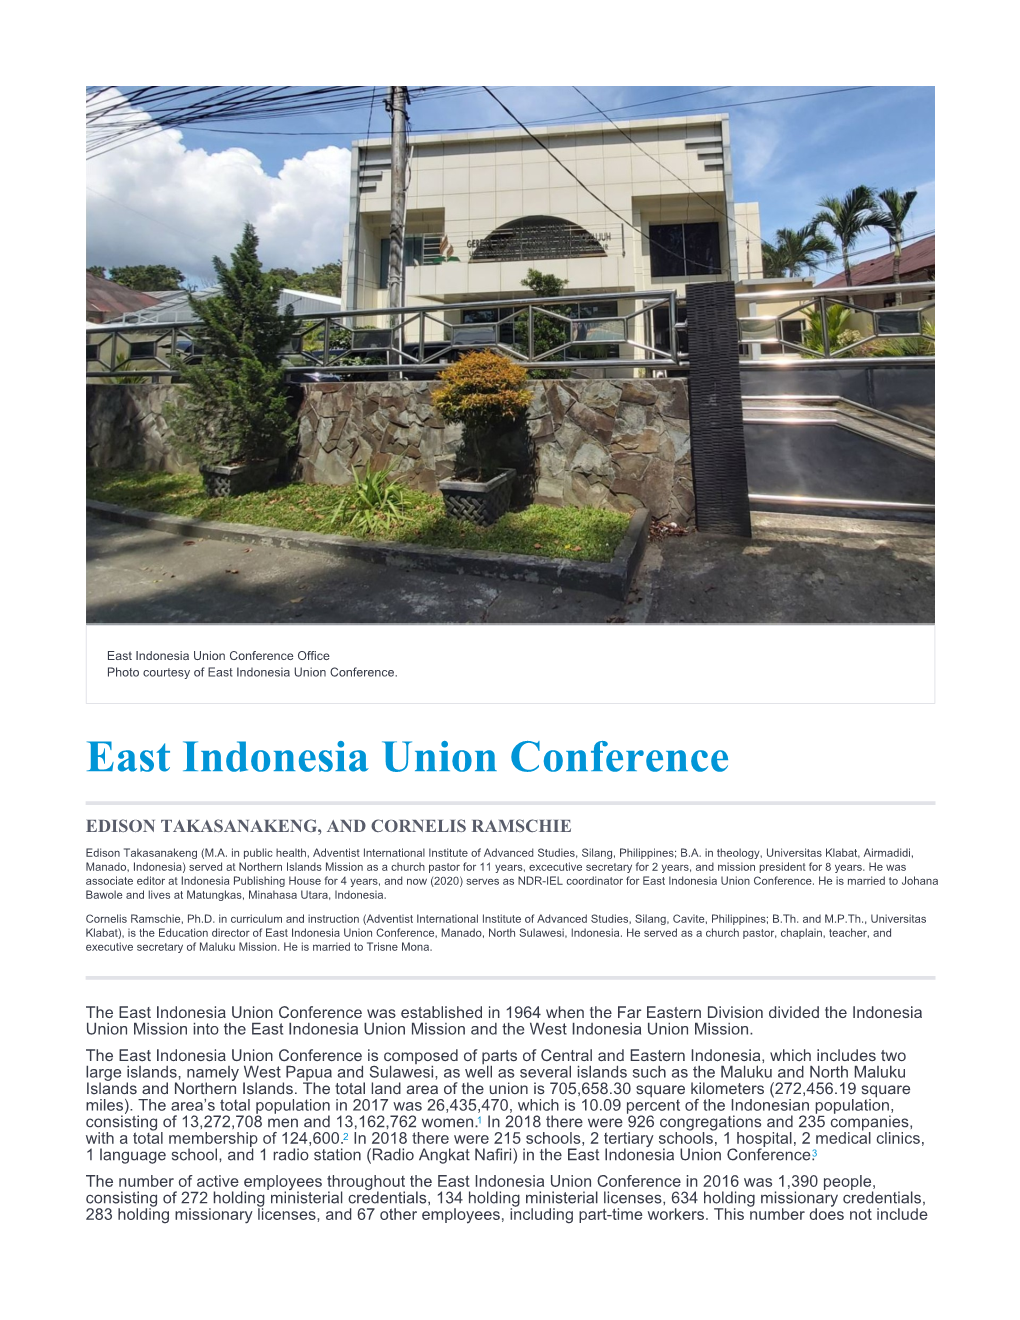 East Indonesia Union Conference Office Photo Courtesy of East Indonesia Union Conference